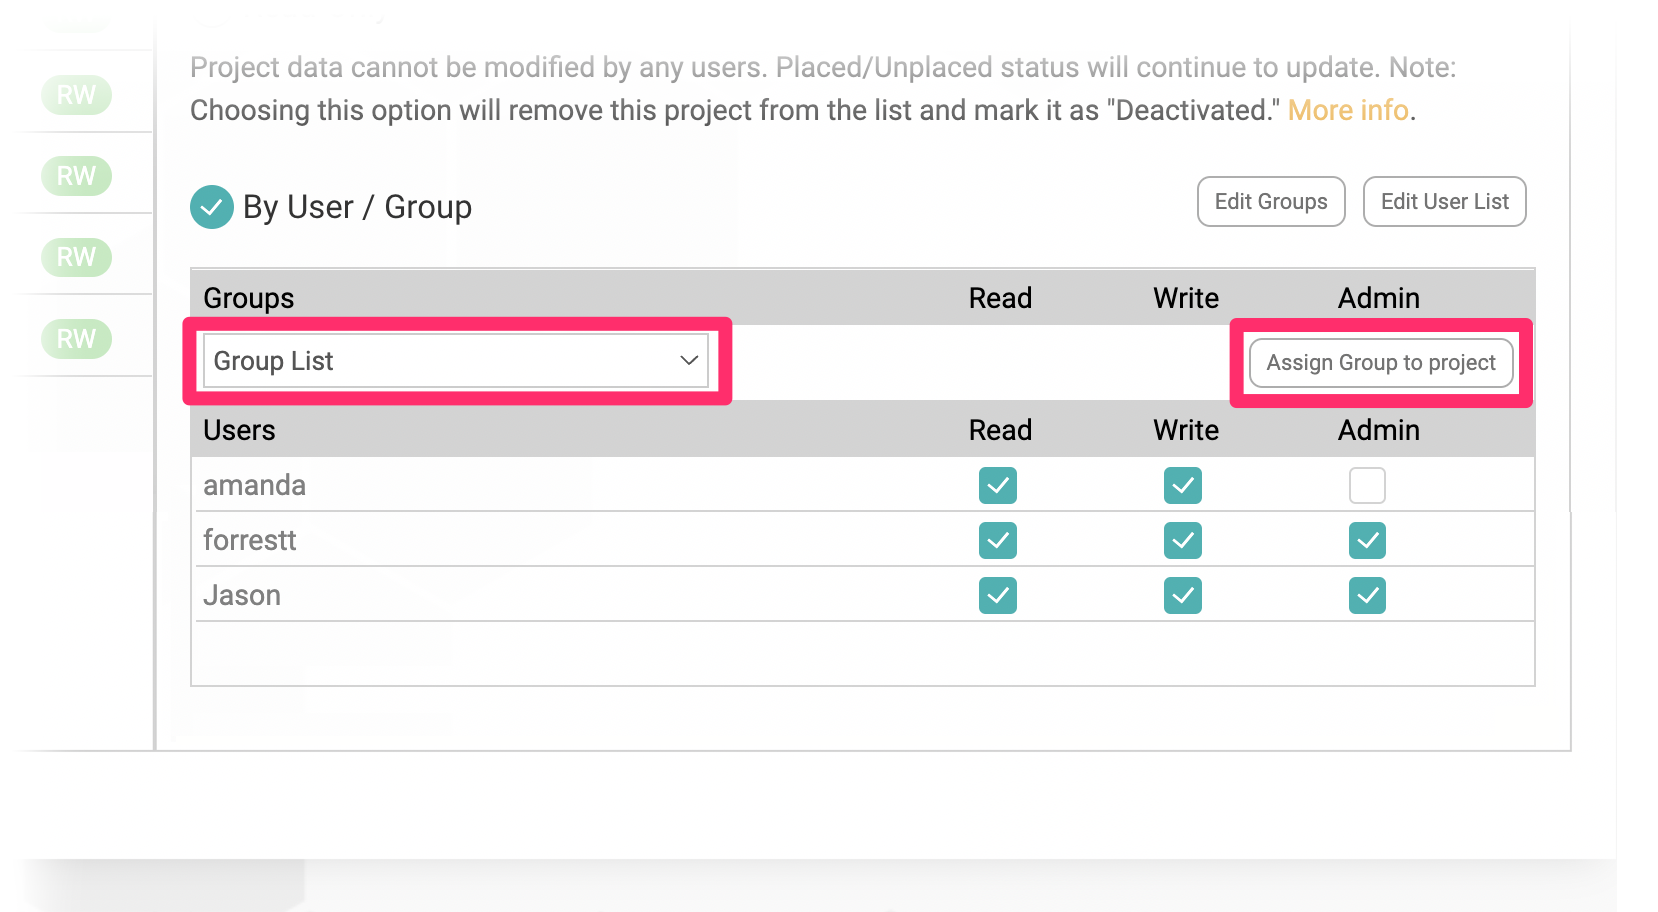 Group List menu and Assign Group to Project button